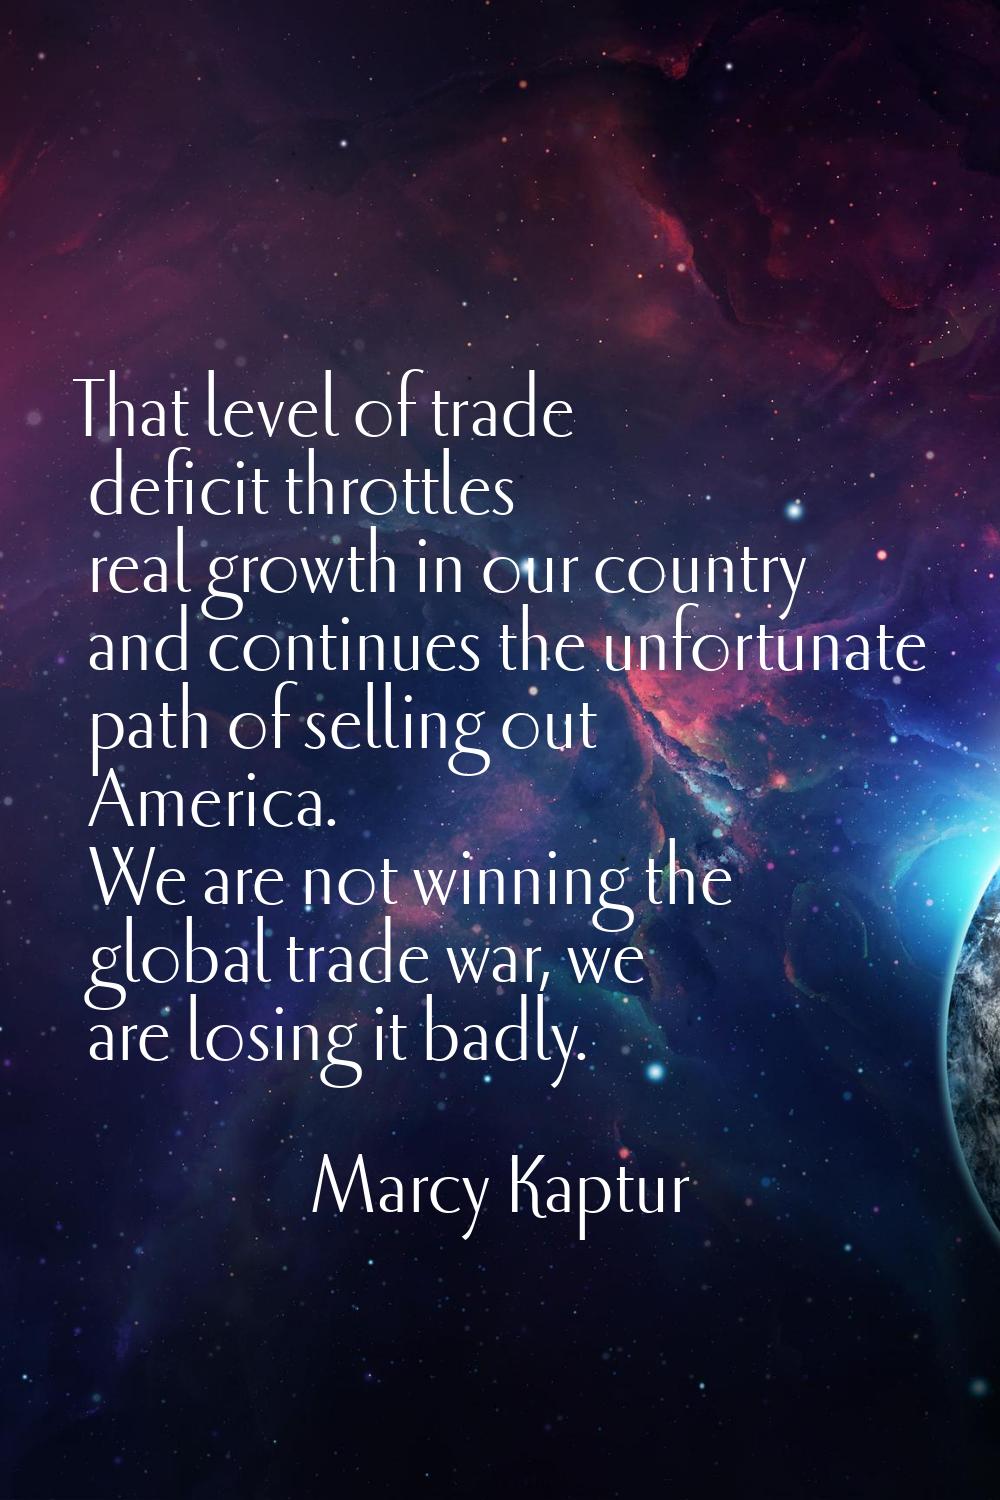 That level of trade deficit throttles real growth in our country and continues the unfortunate path